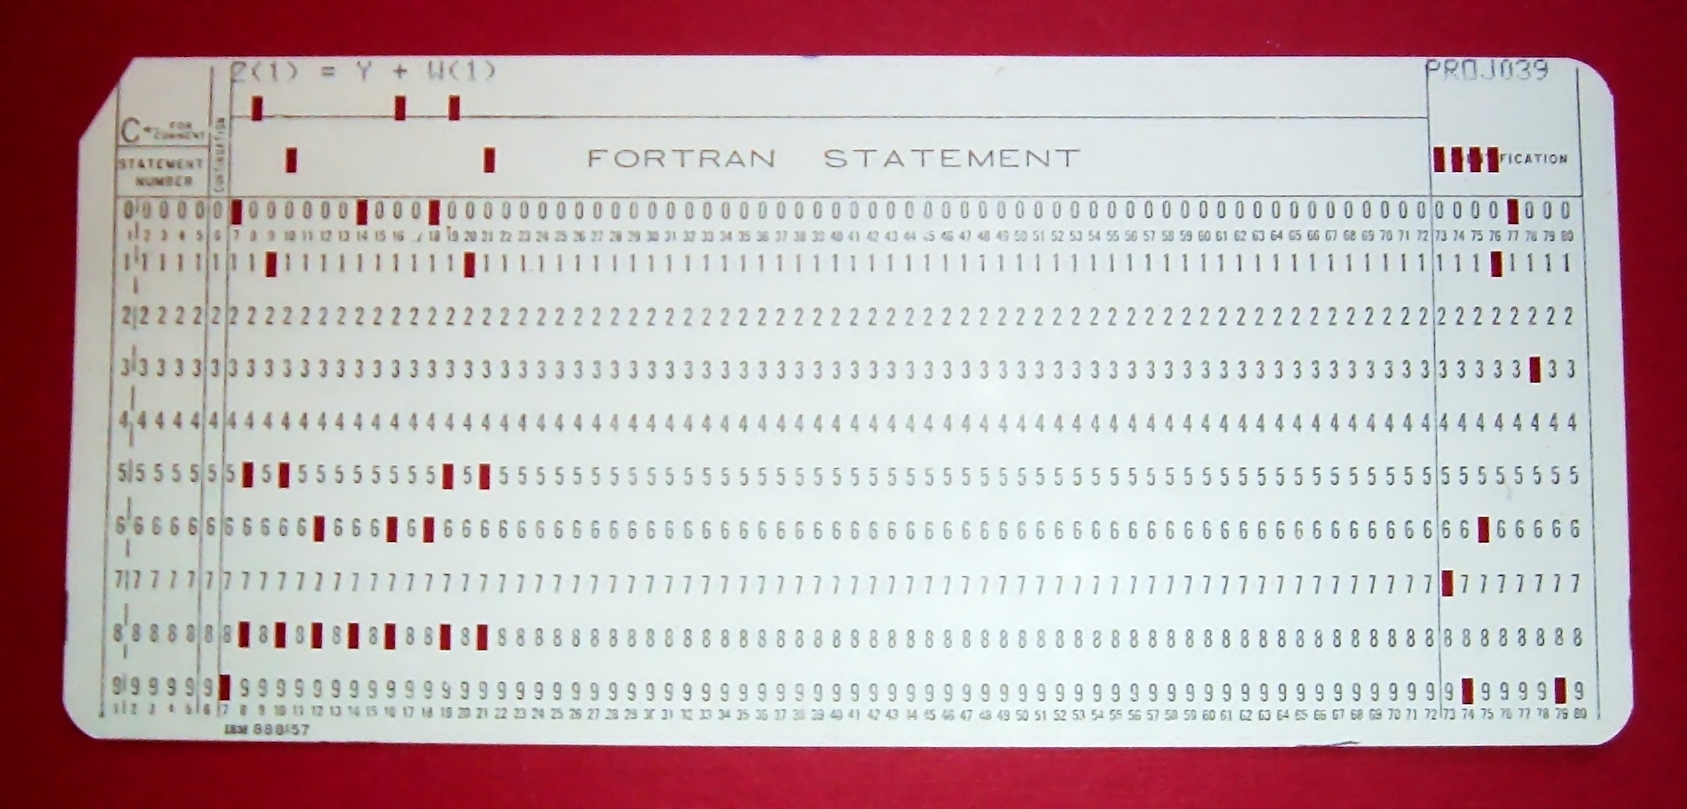 Punched card representing a Fortran statement